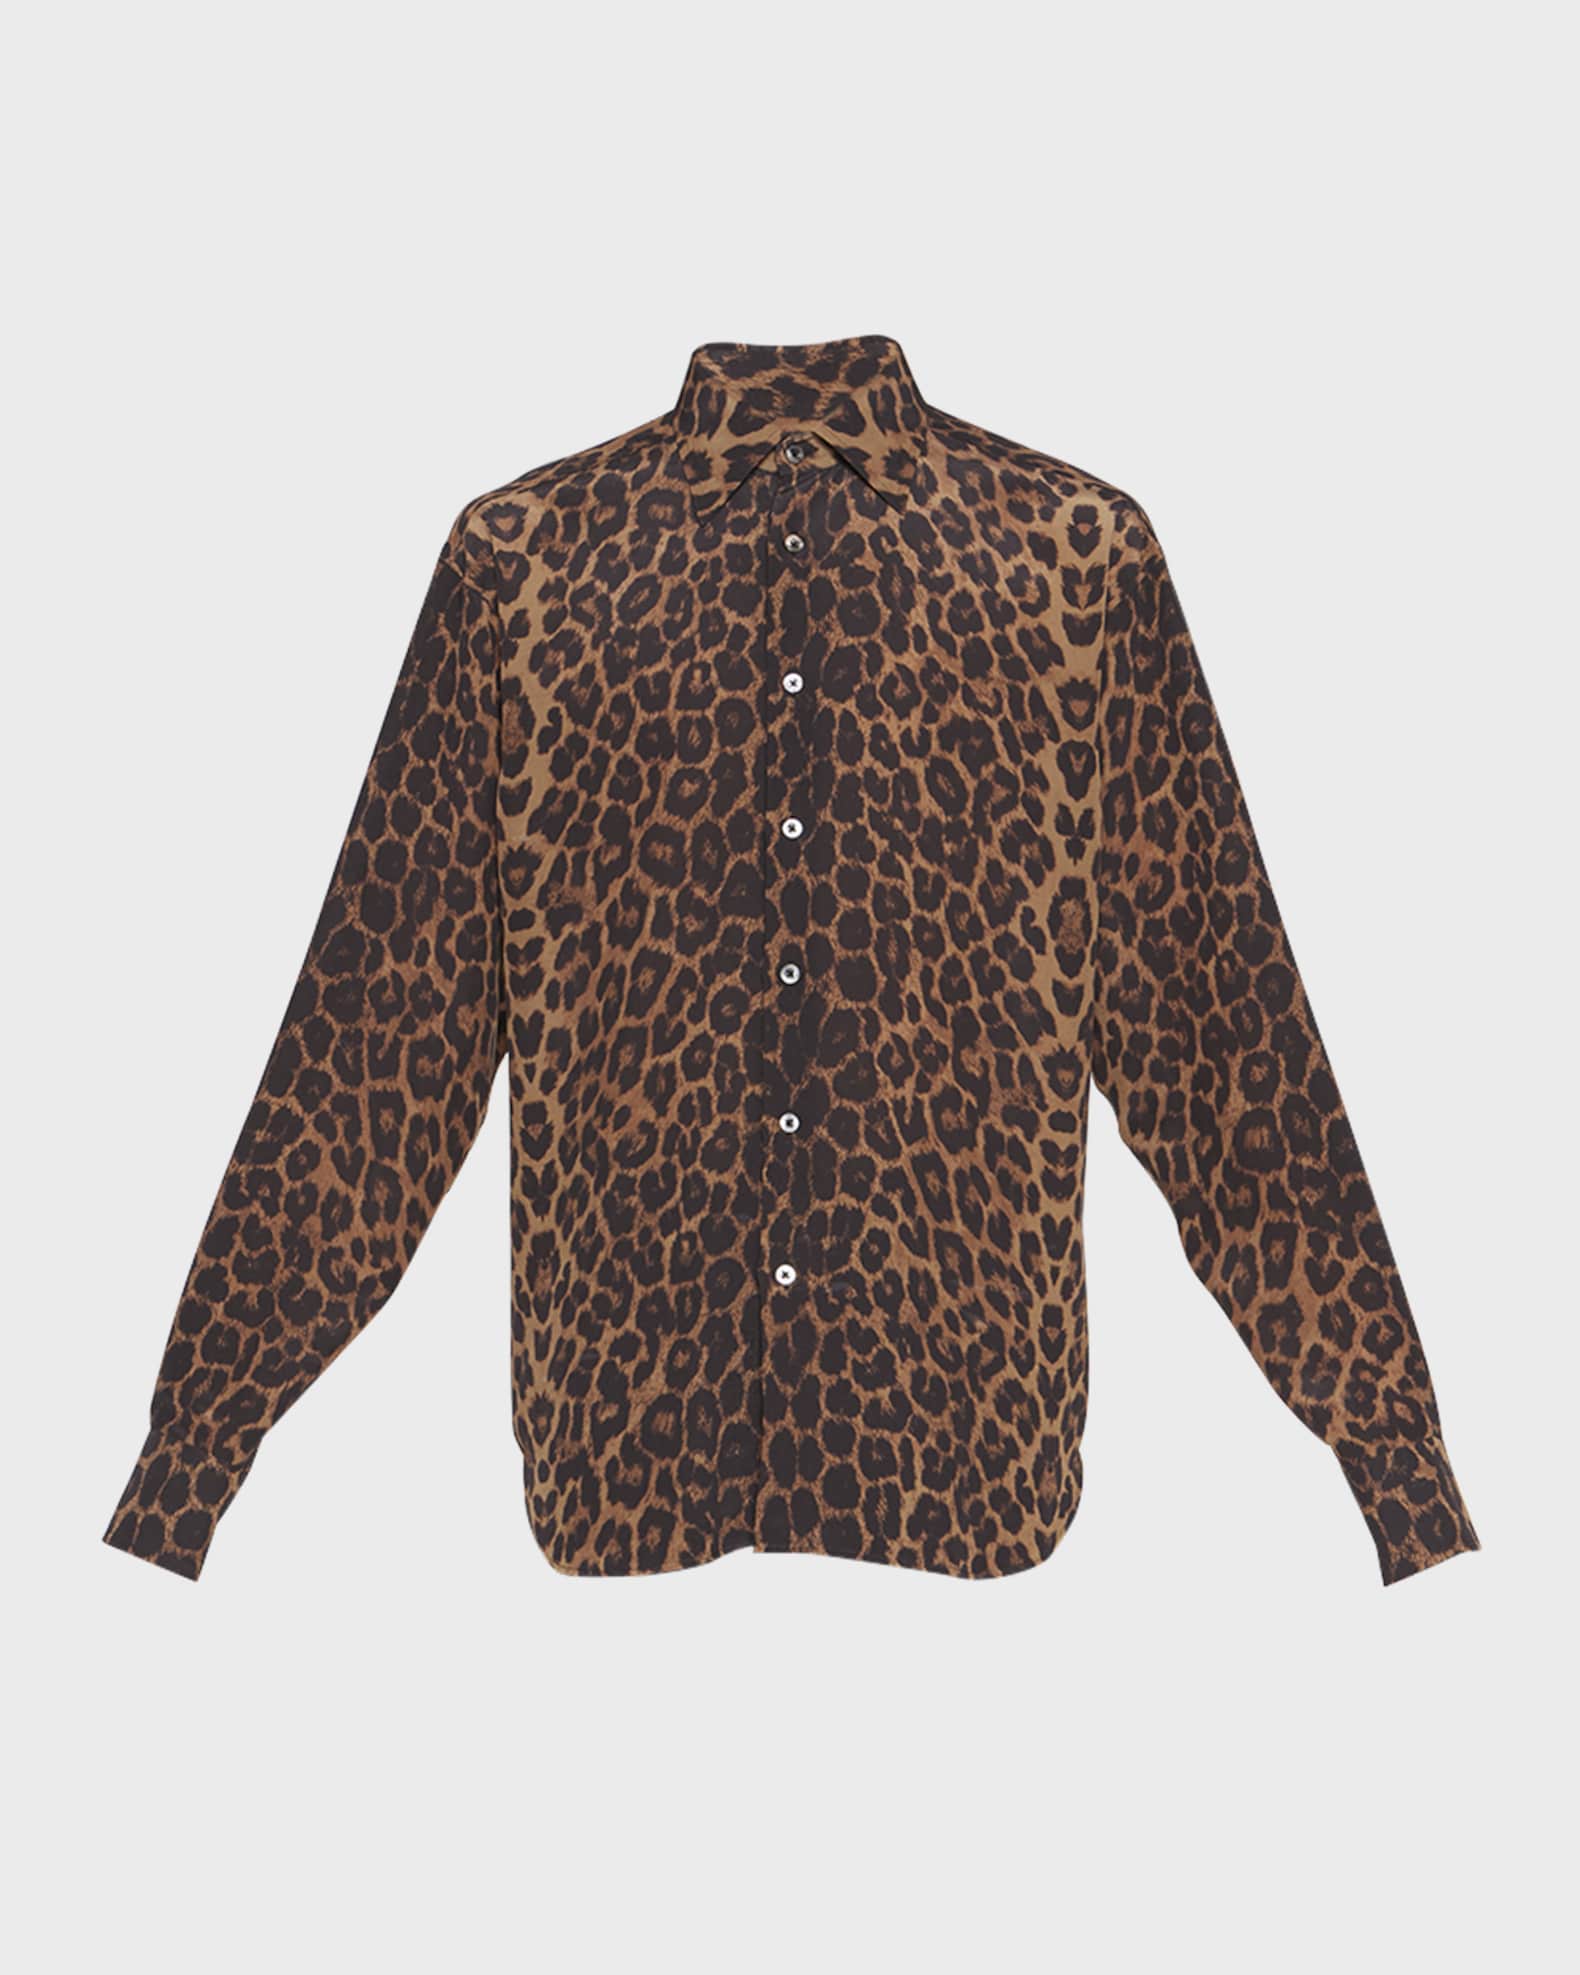 TOM FORD Men's Leopard-Print Relaxed Fit Sport Shirt | Neiman Marcus